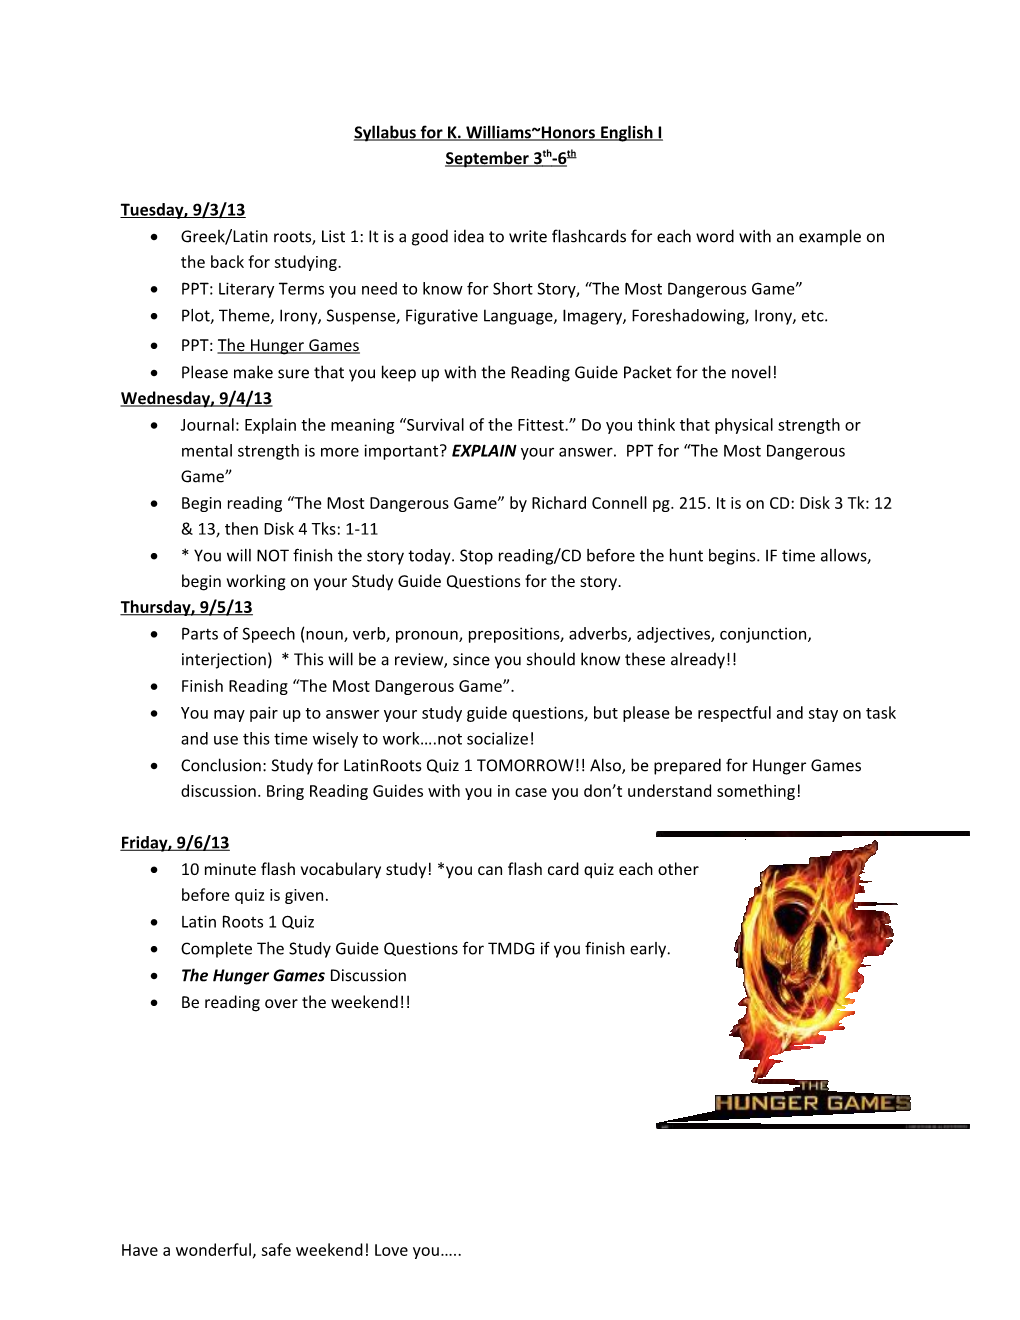 Syllabus for K. Williams Honors English I s1